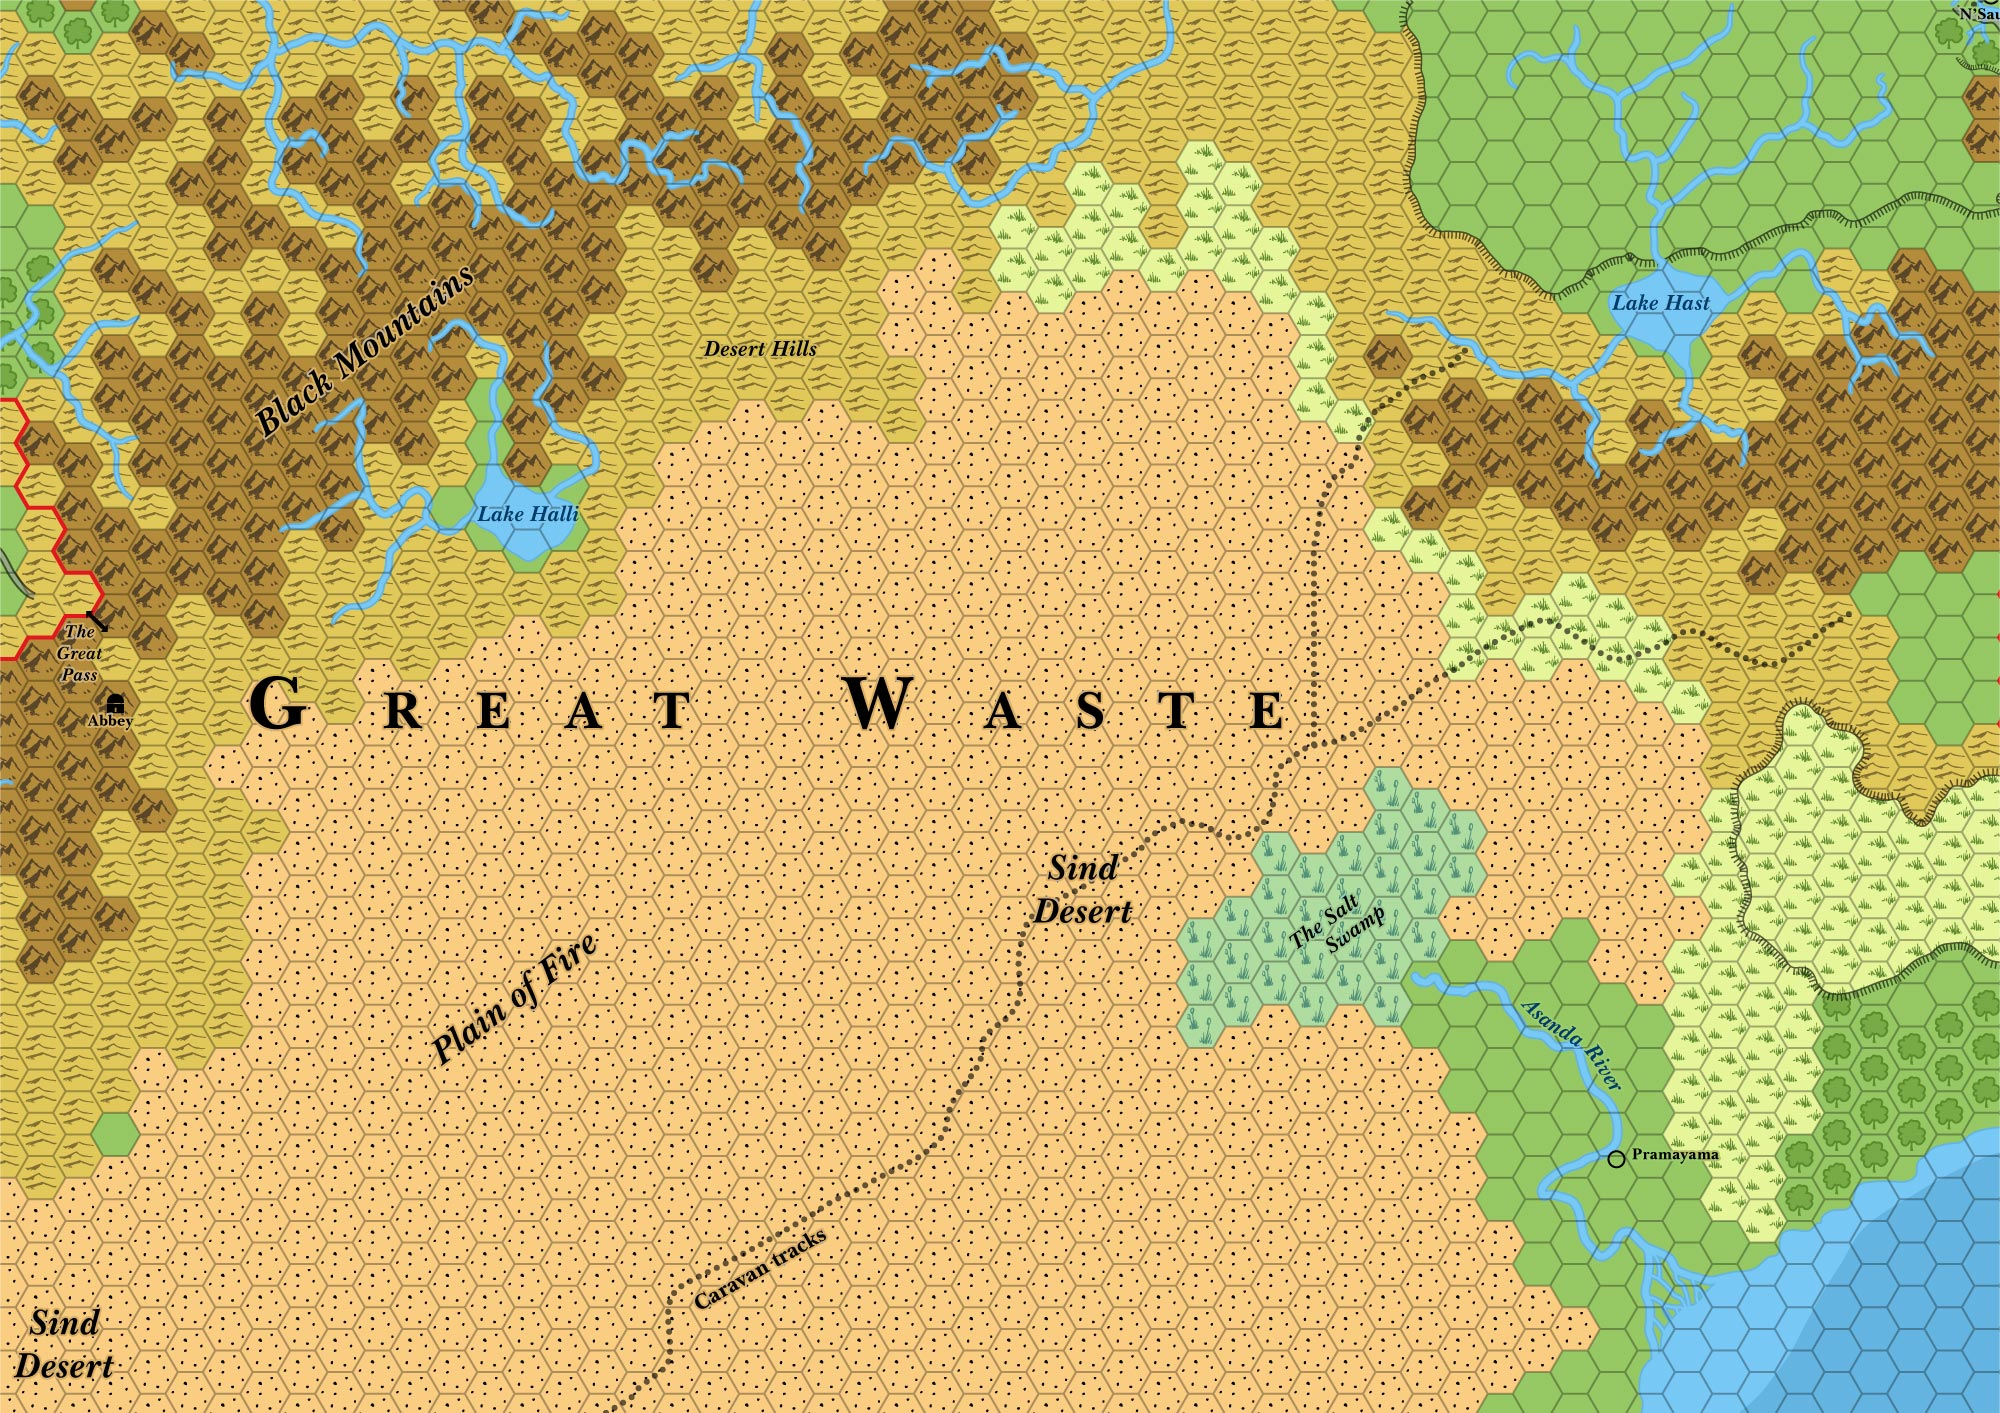 Great Waste, 24 miles per hex (1984)